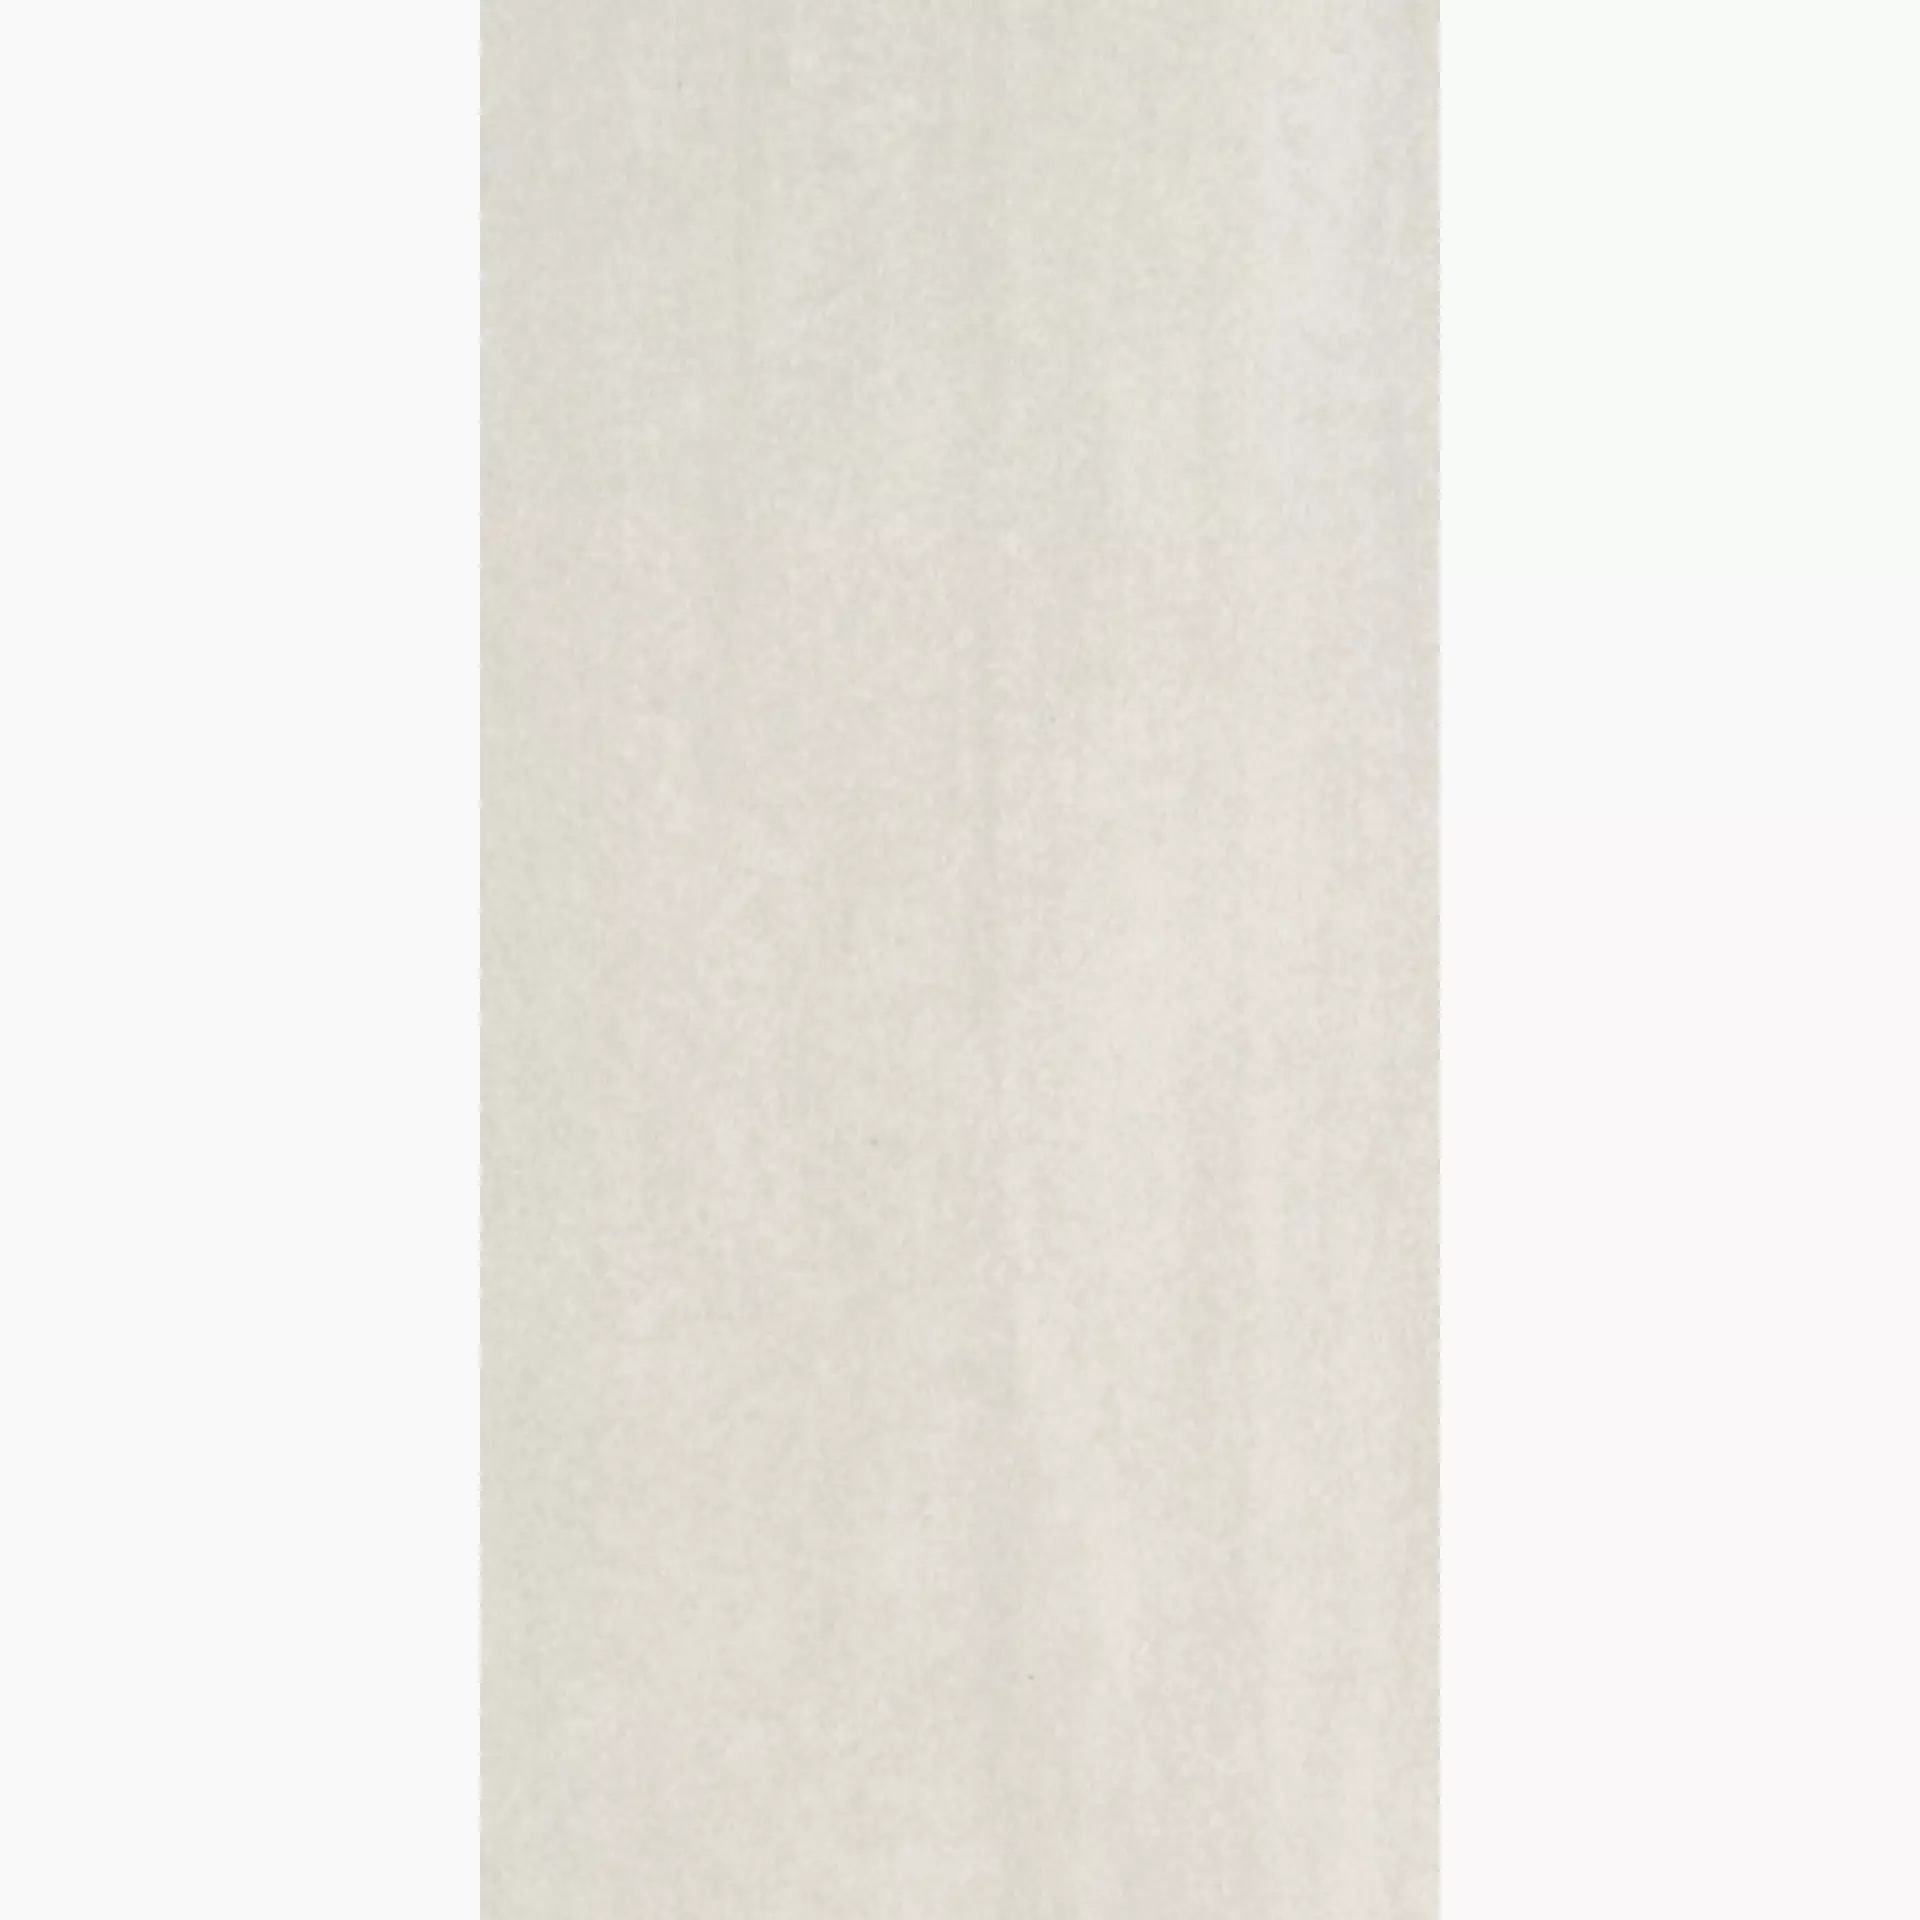 Rondine Contract Ivory Naturale J83707 30x60cm rectified 9,5mm